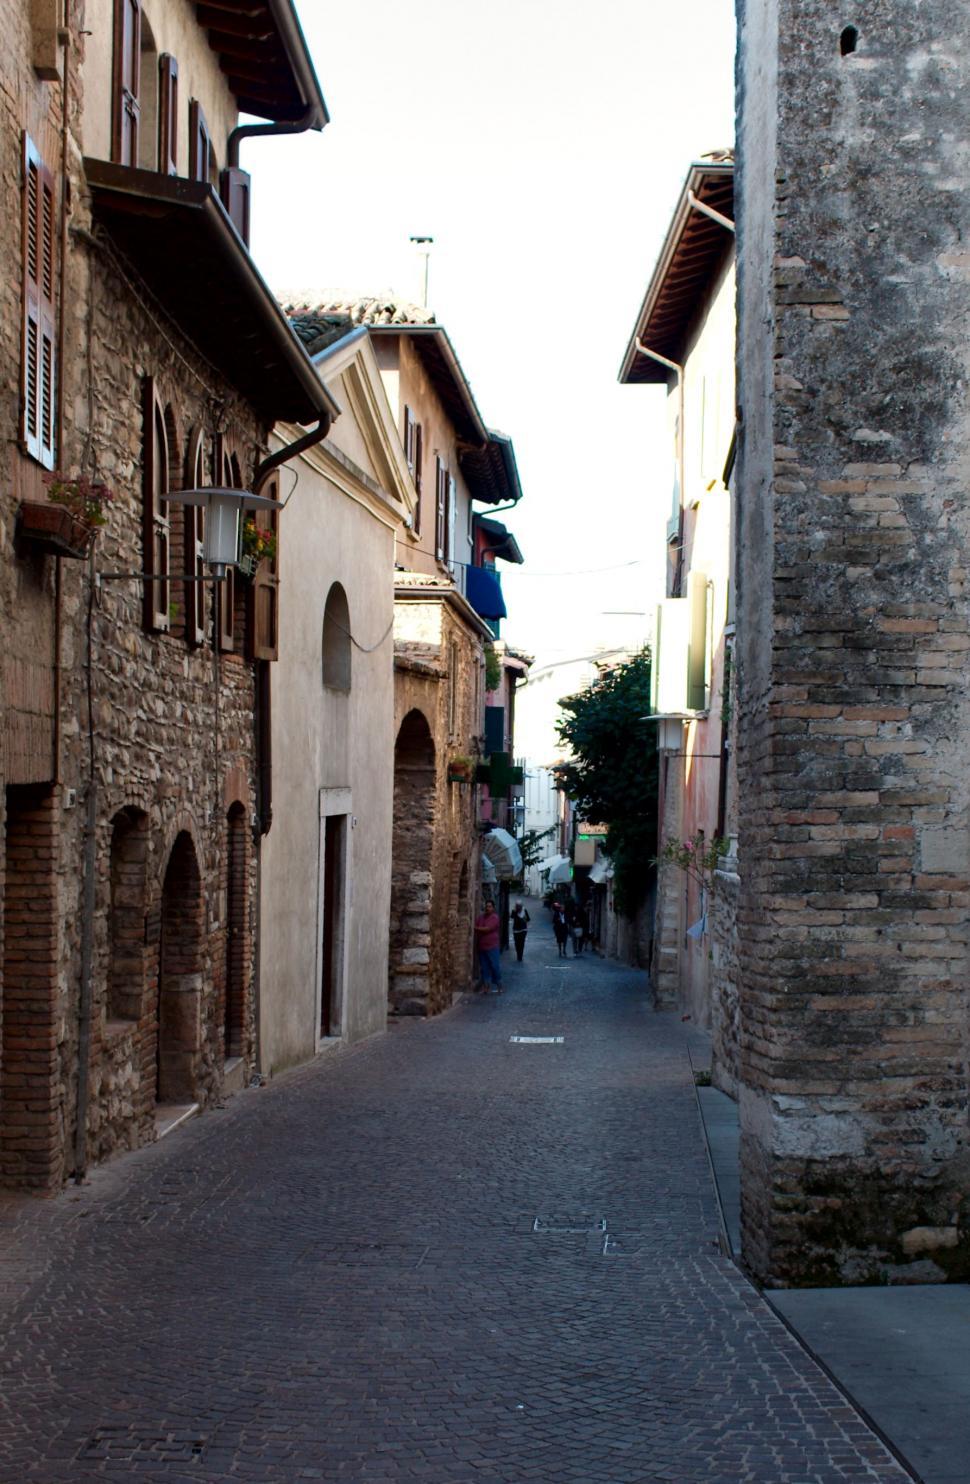 Free Image of Street in Italy 